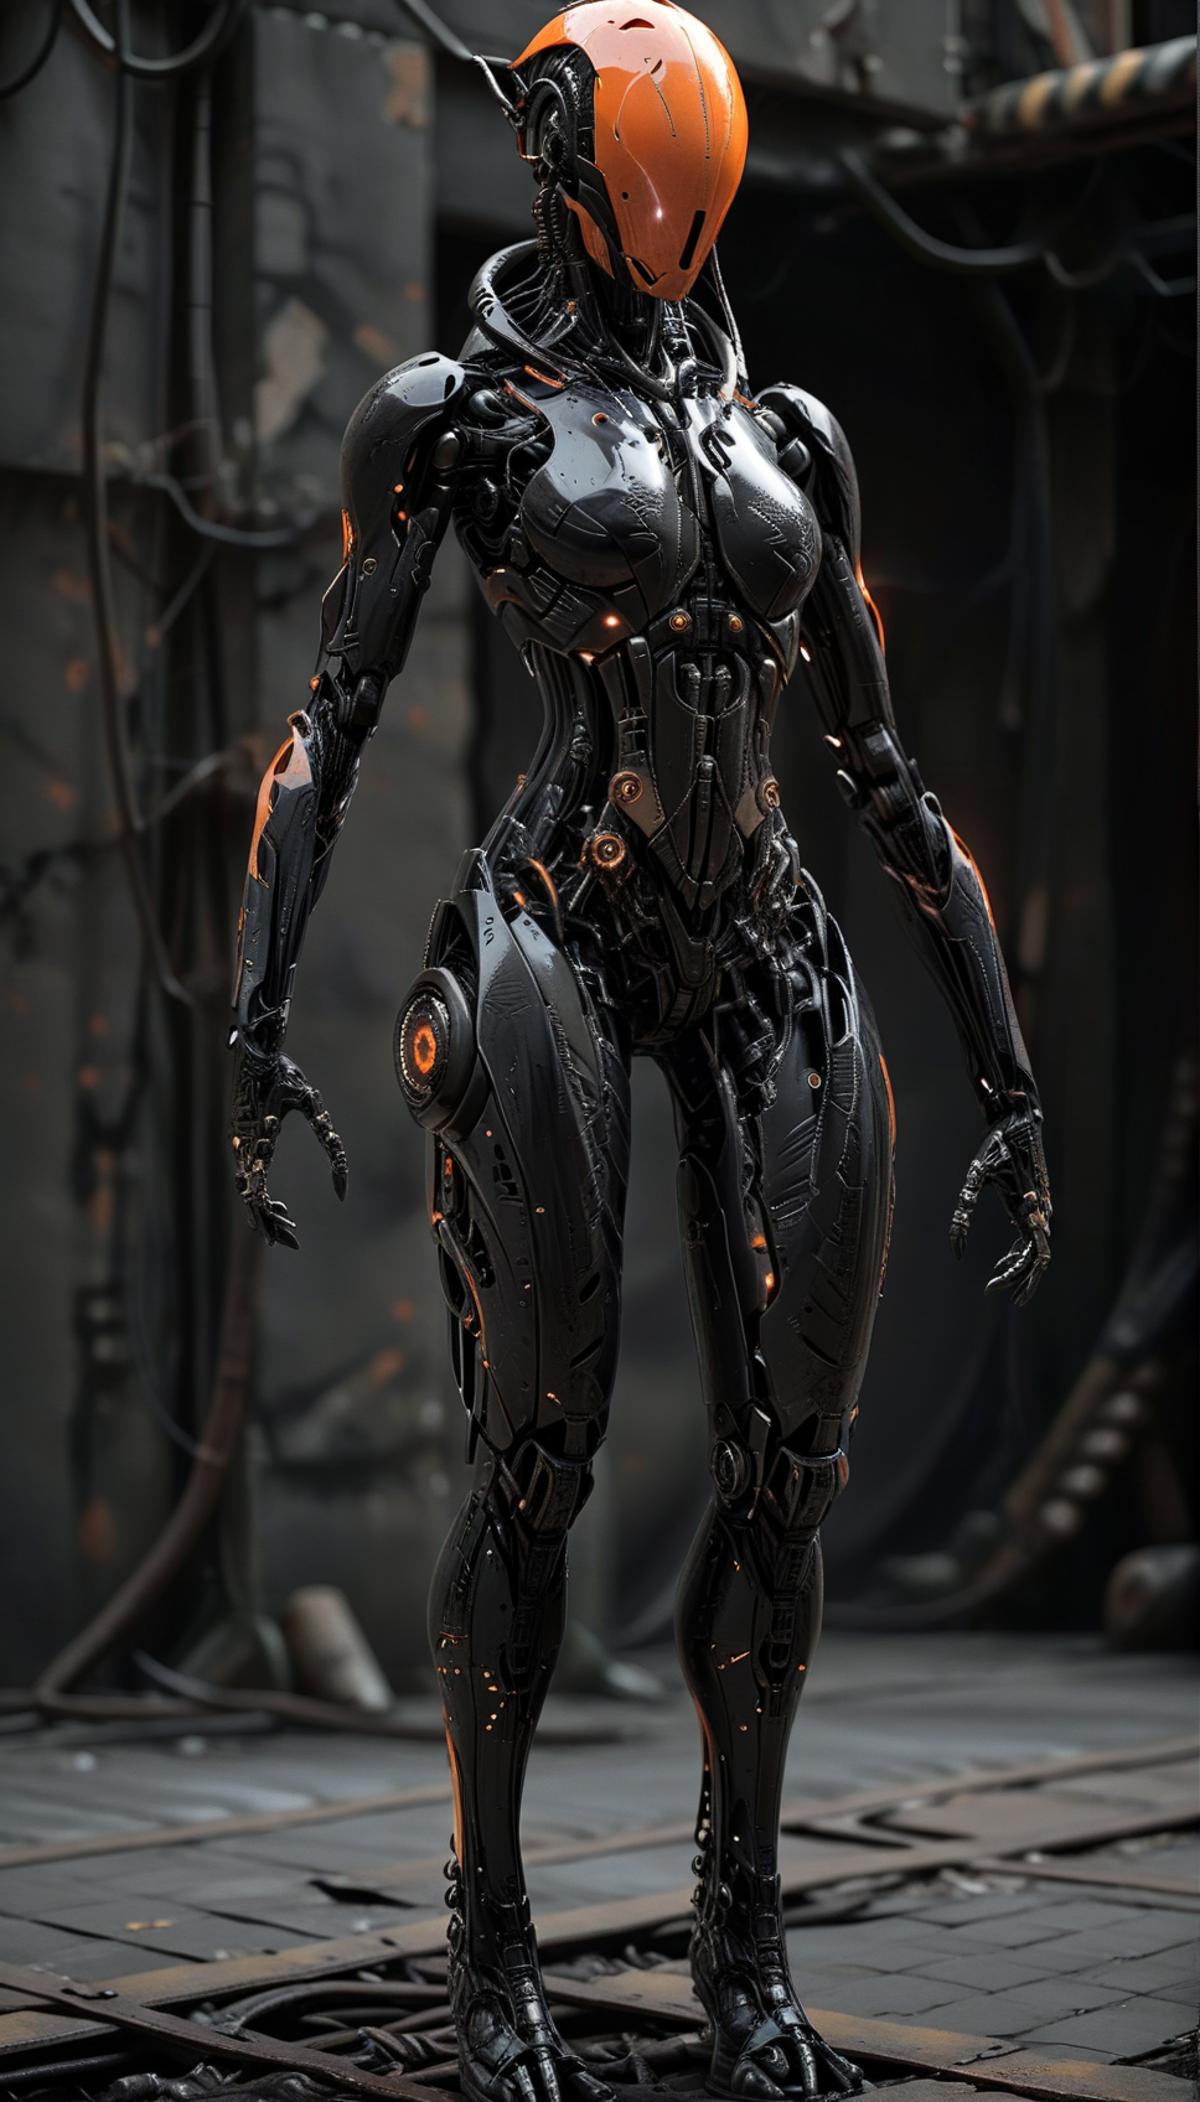 Futuristic Robotic Woman with Large Breasts and Mechanical Body.